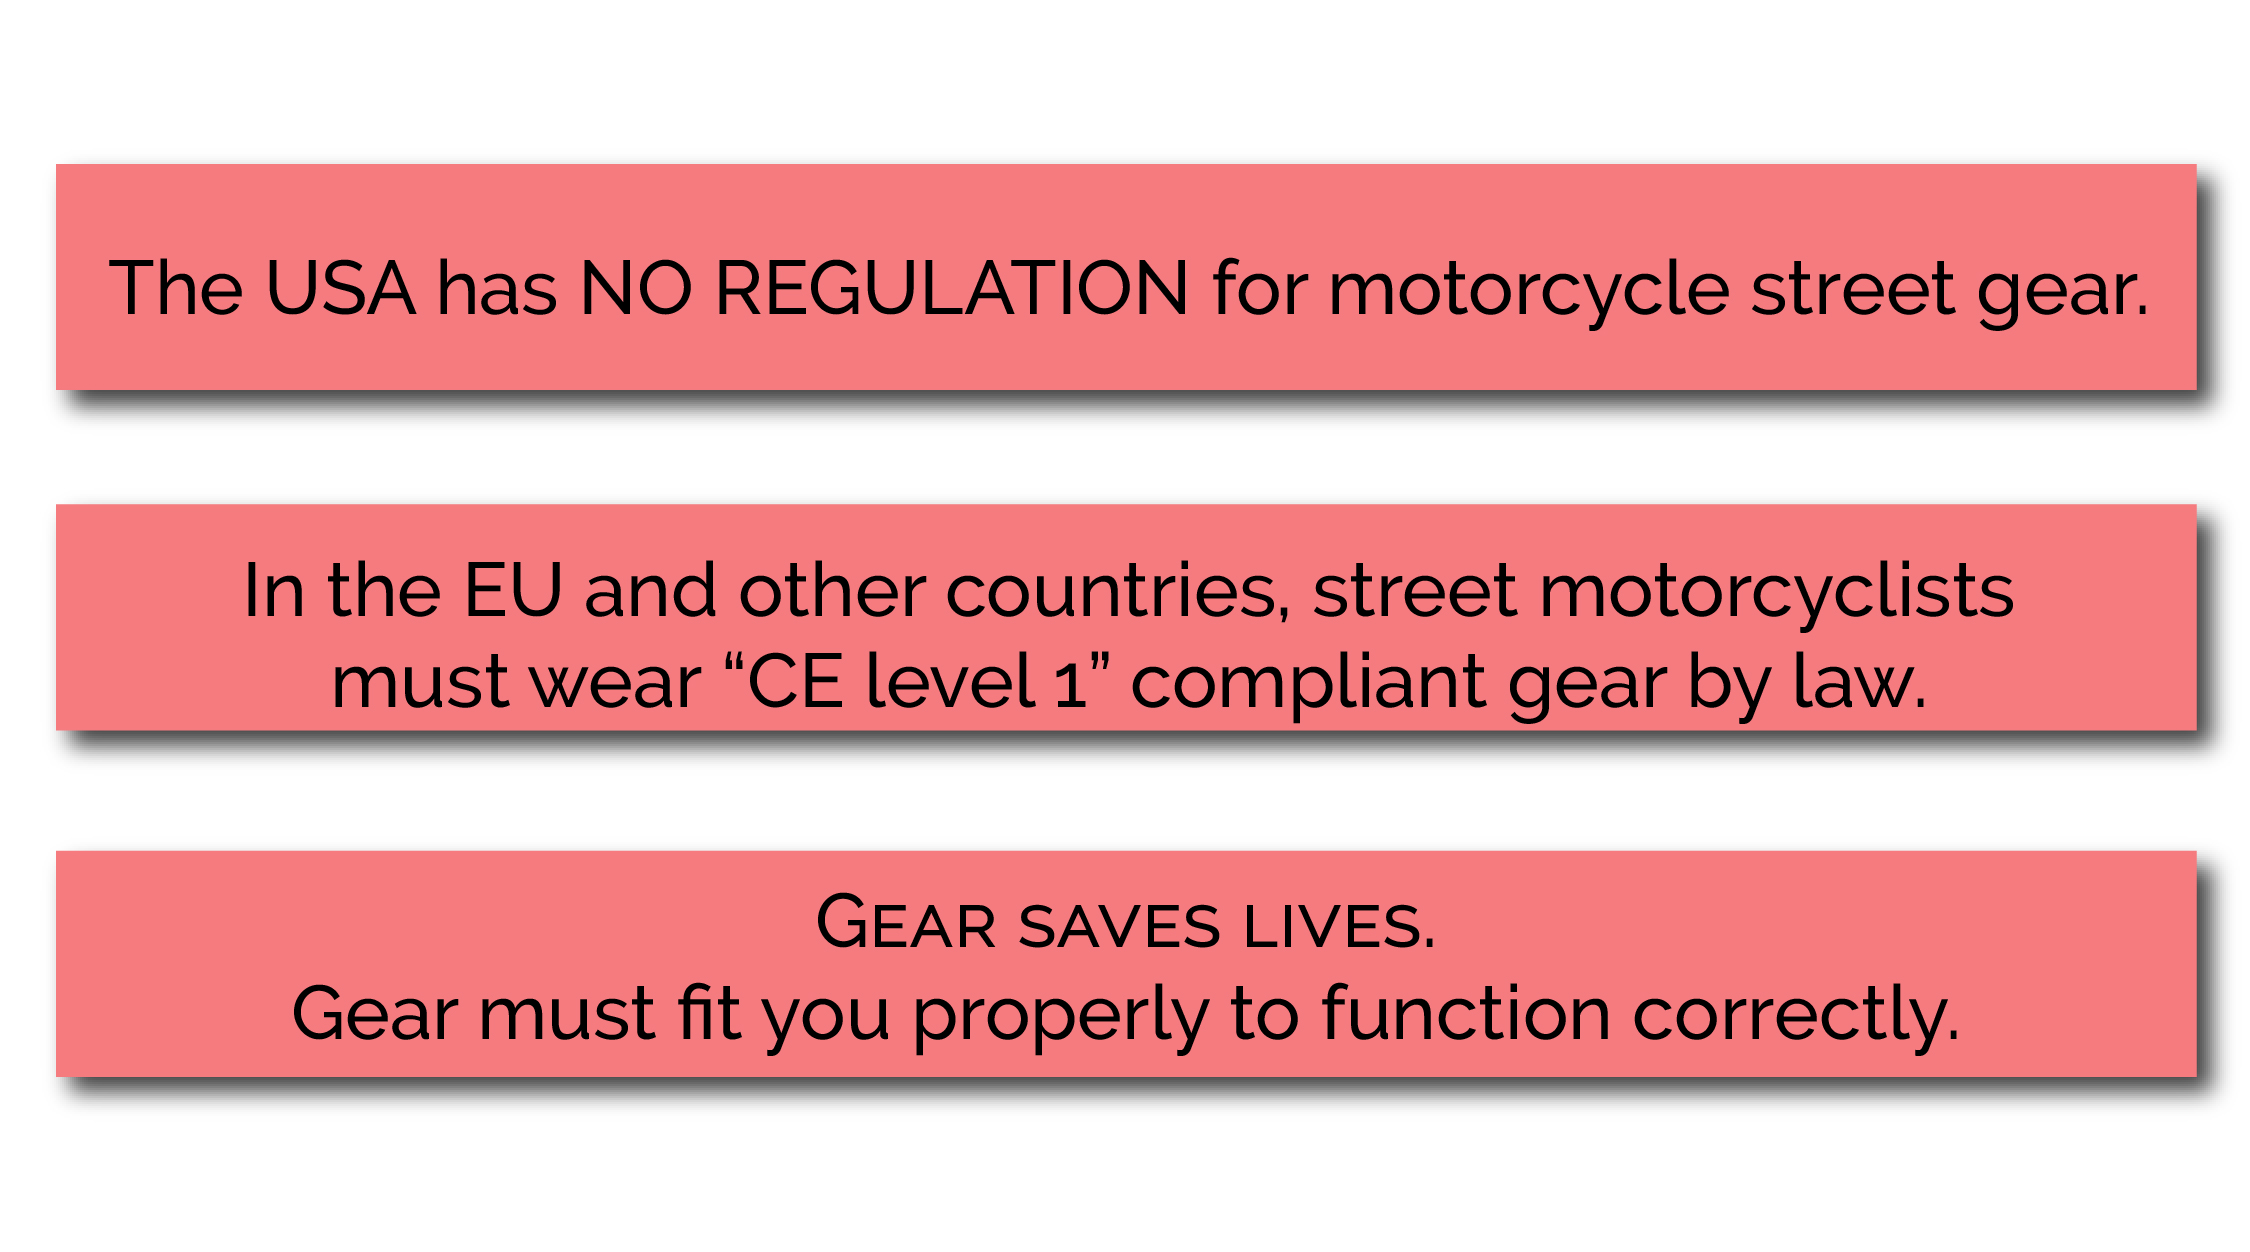 The USA has no regulation for motorcycle street gear. In the EU motorcyclist's must wear CE-1 compliant gear by law. Gear saves lives. Gear must fit you properly to function correctly.